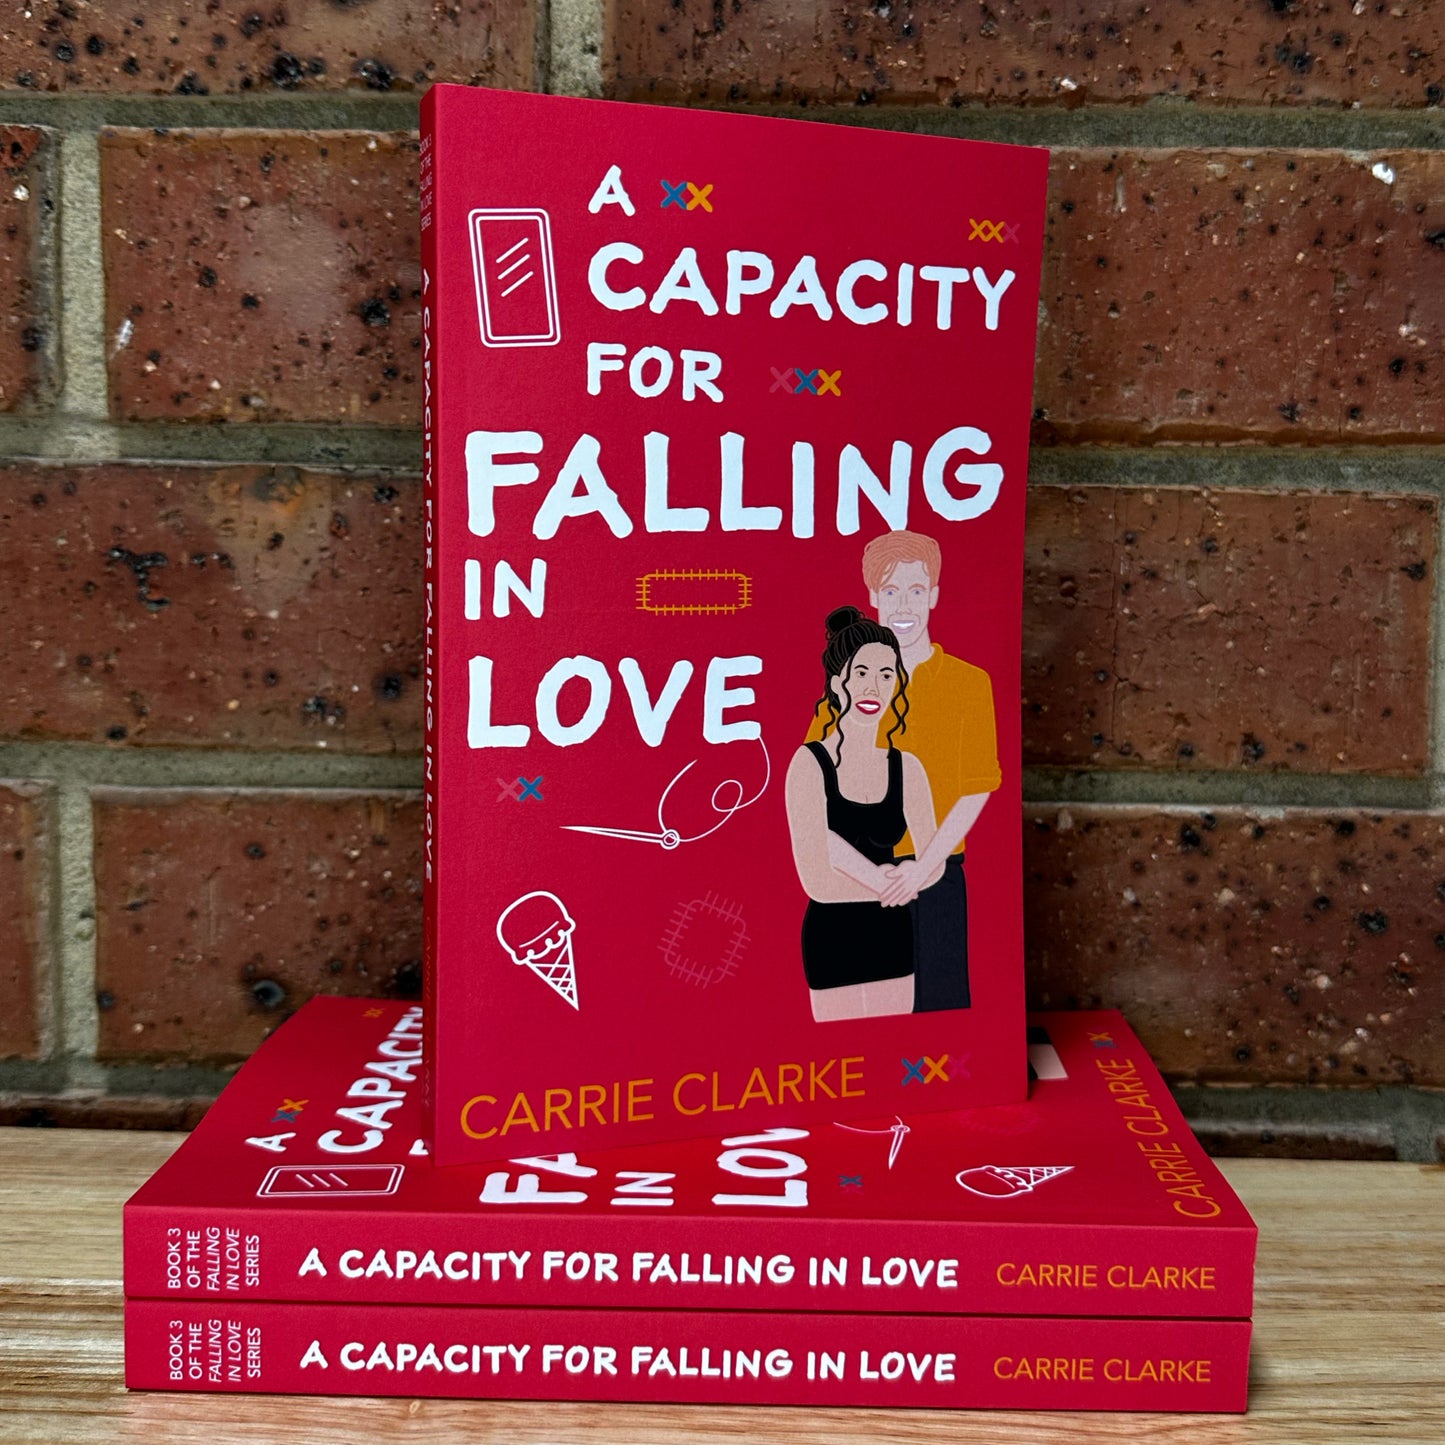 A Capacity for Falling in Love (Falling in Love #3) by Carrie Clarke - SIGNED COPIES